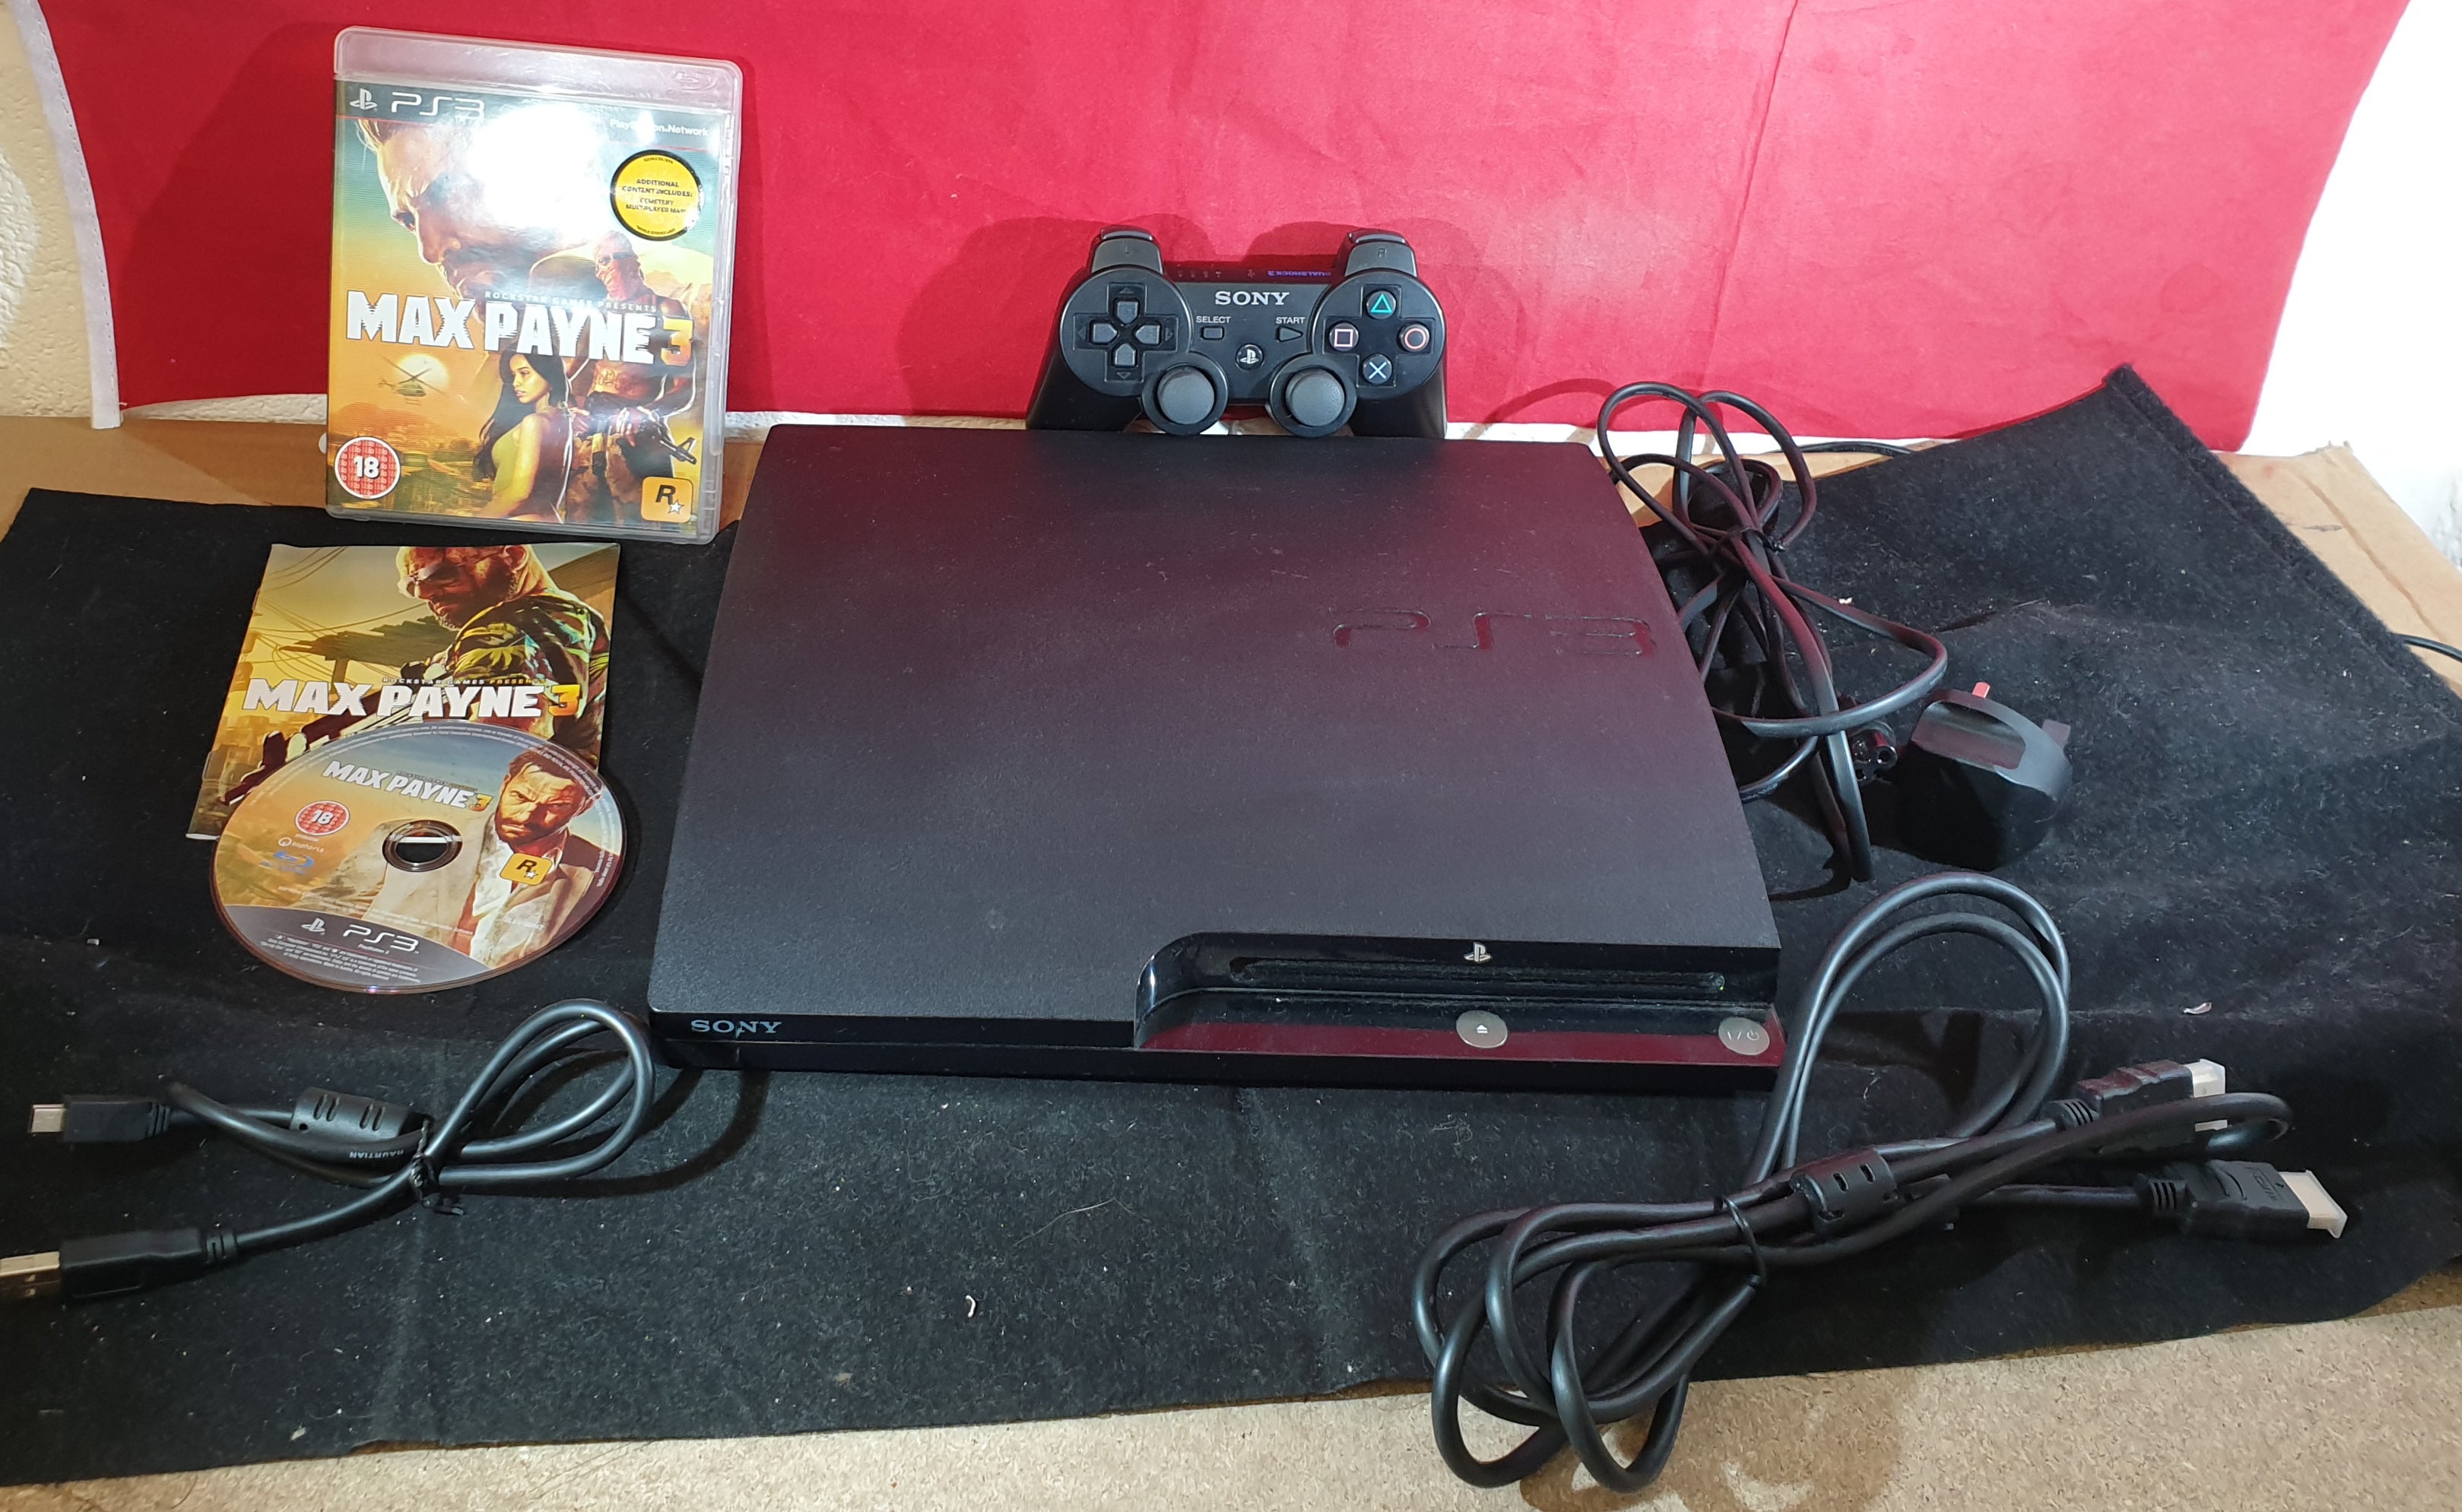 Boxed Sony Playstation 3 (PS3) 250 GB Console CECH 2003B with Max 